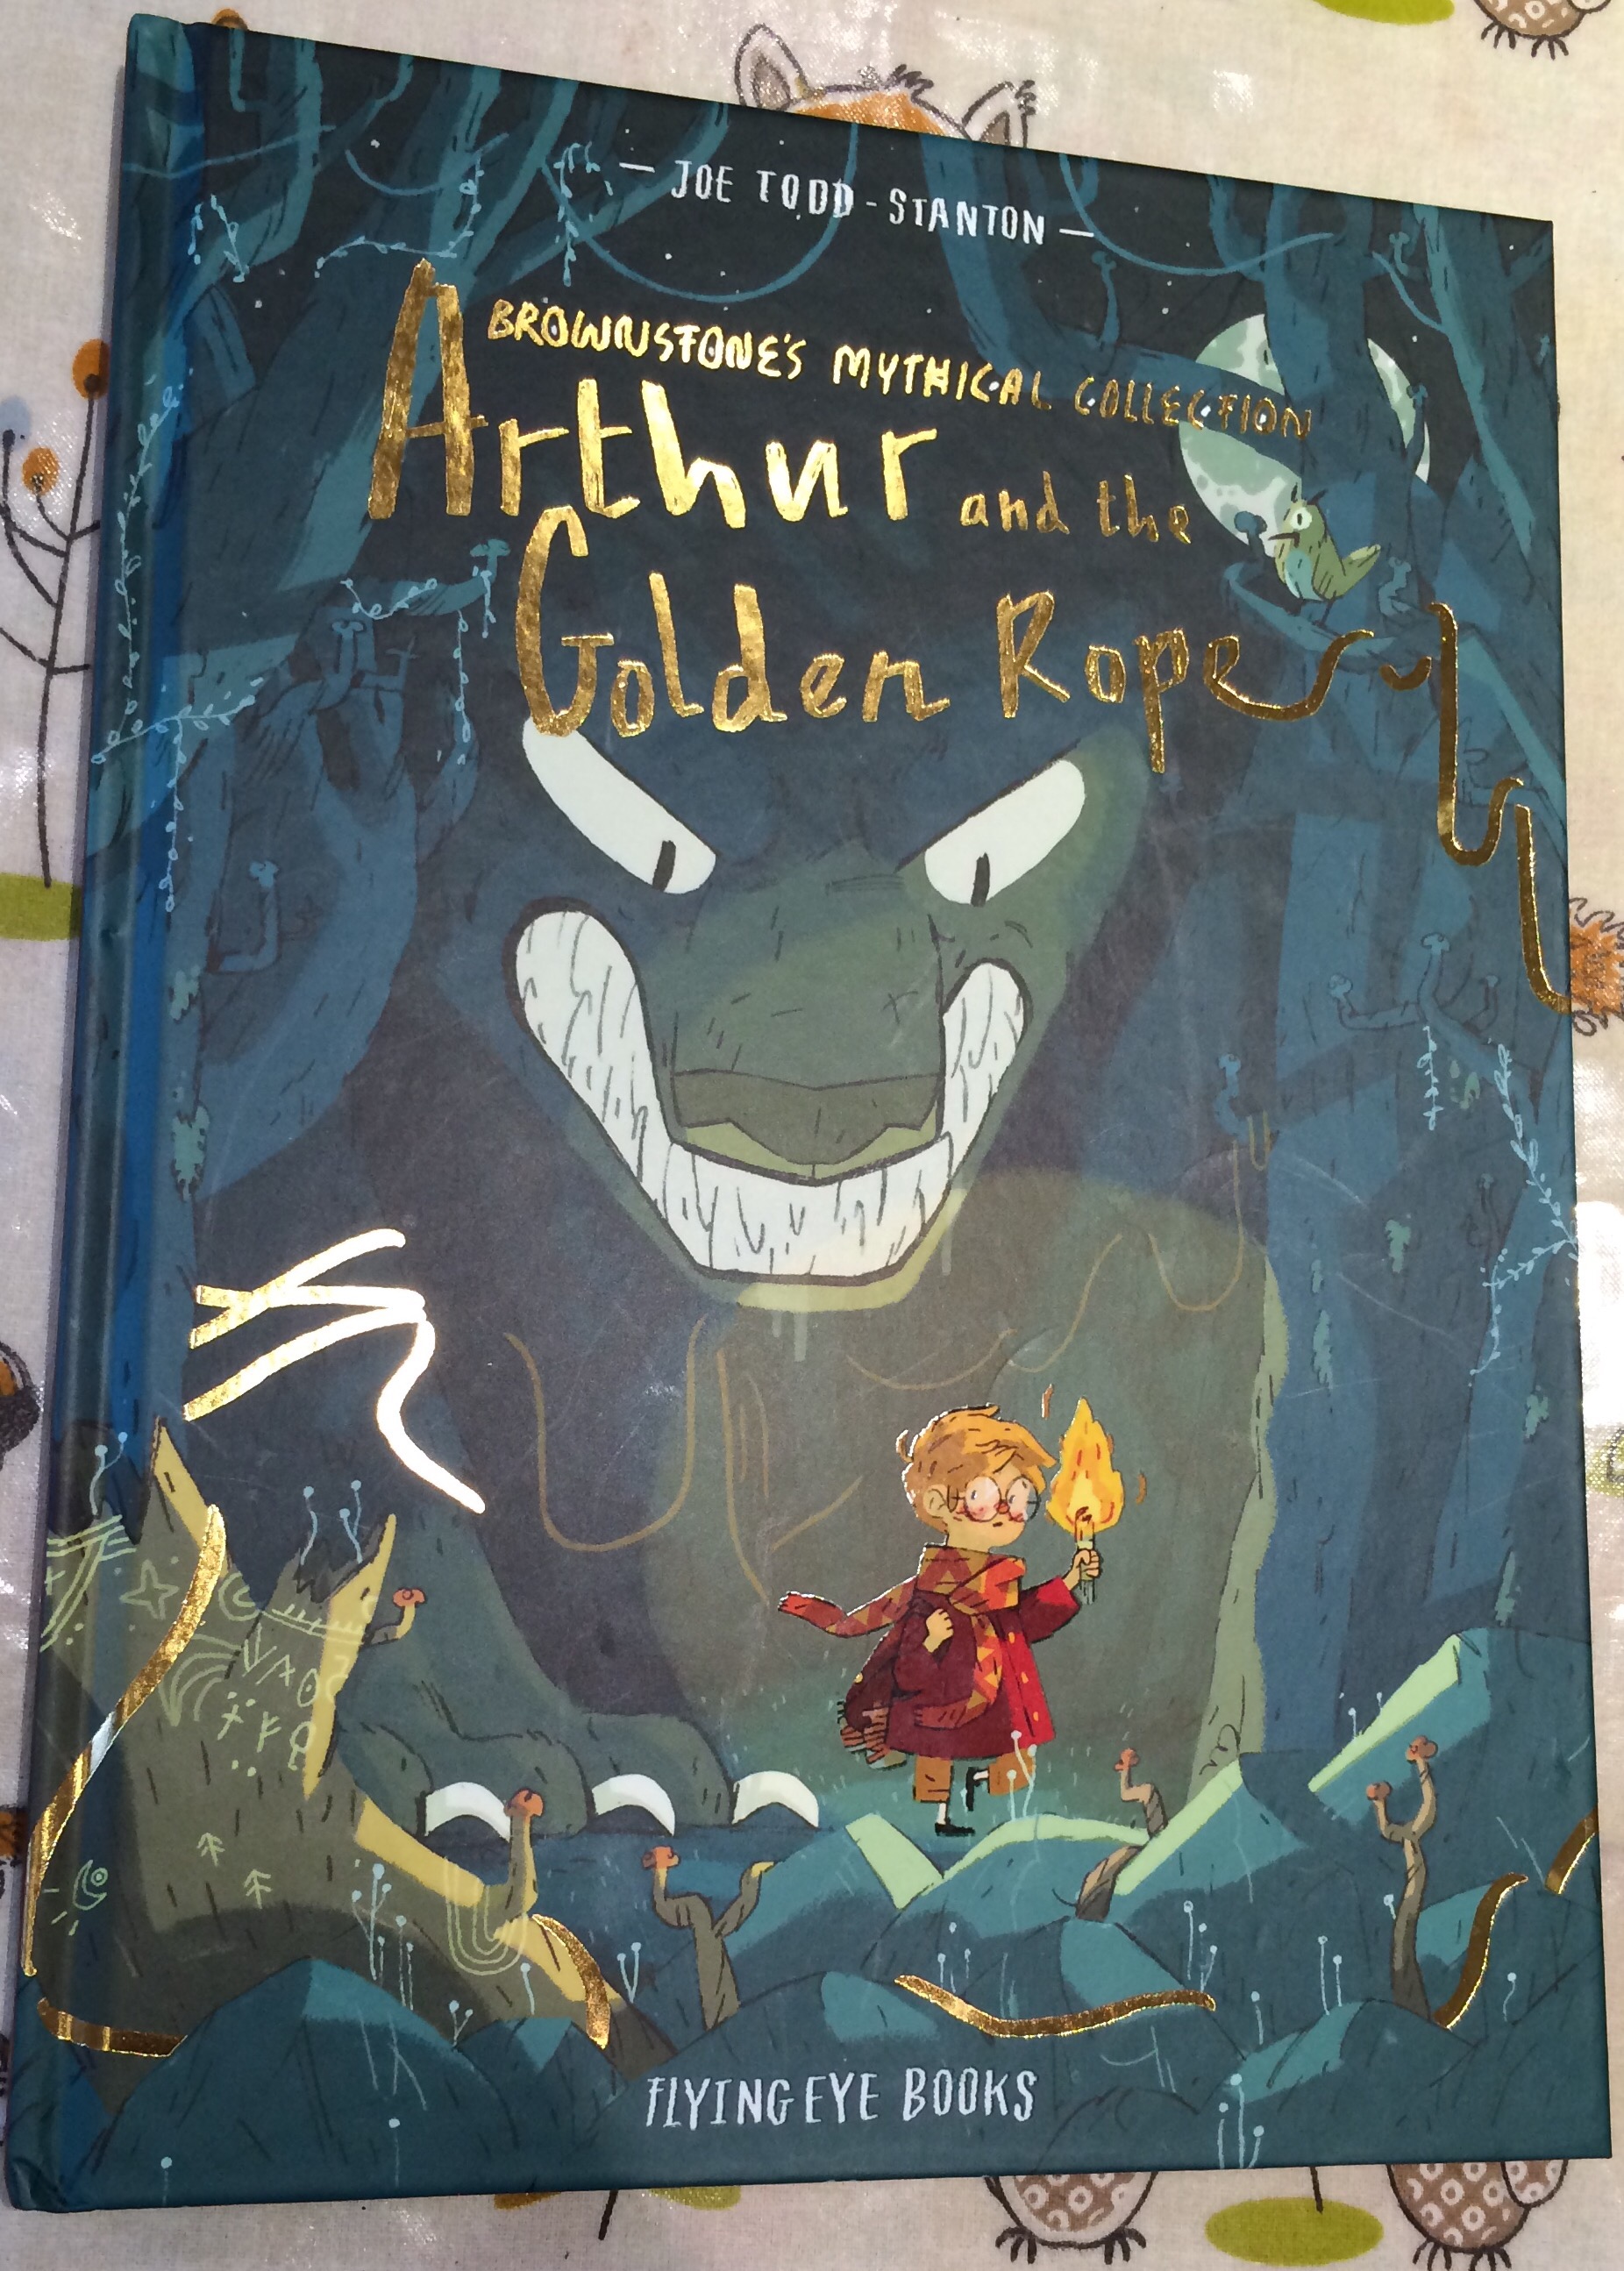 Arthur and the Golden Rope Brownstones Mythical Collection